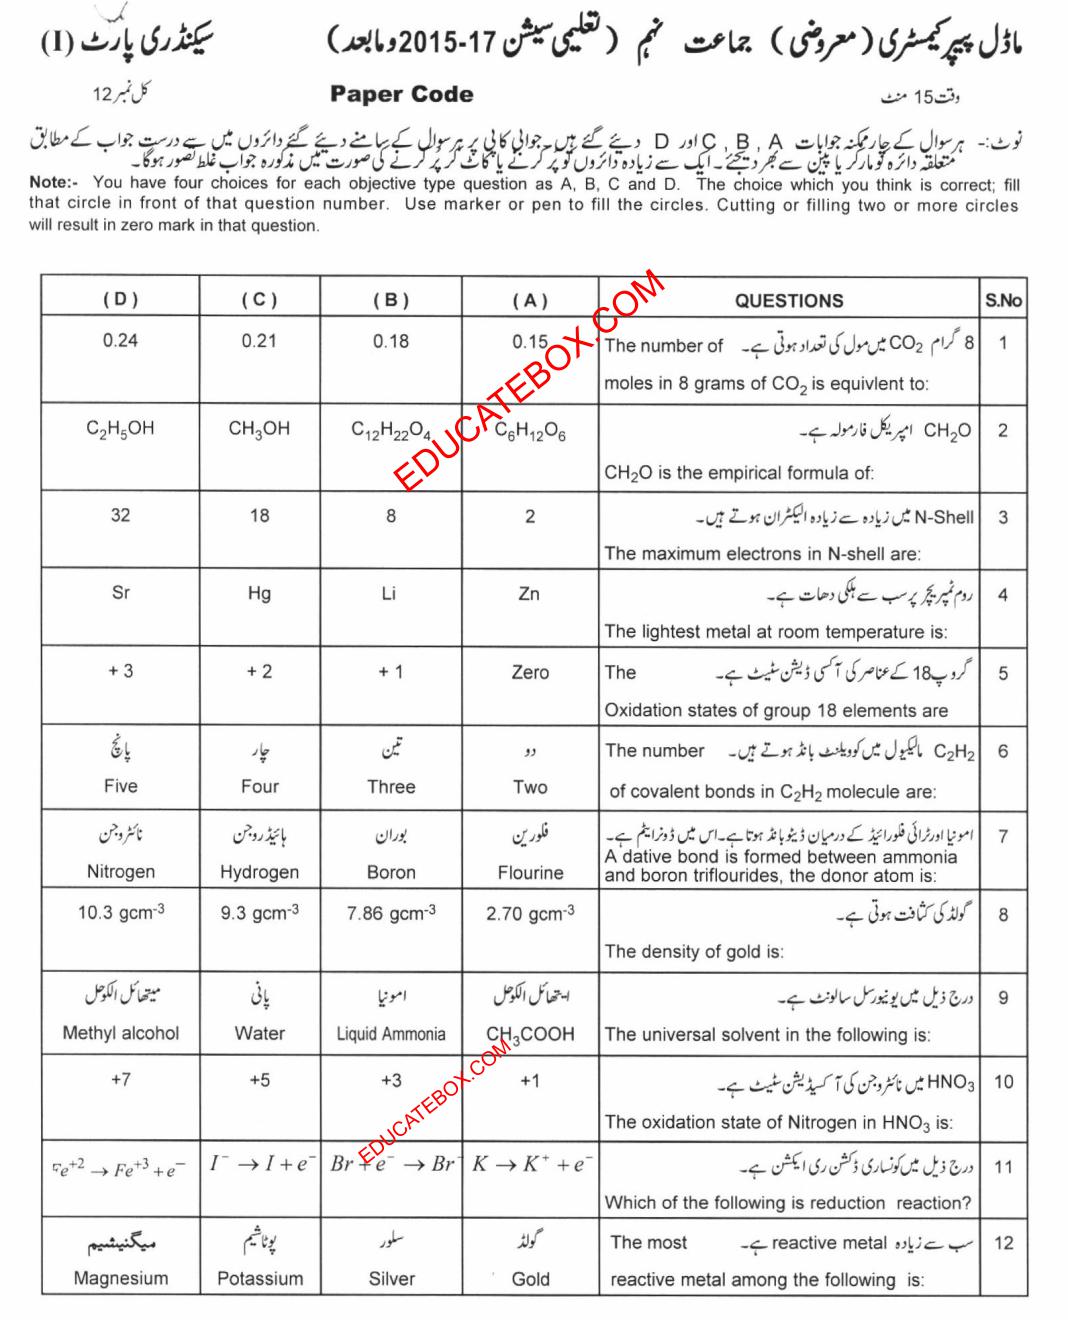 Model Paper 9th Class Chemistry Subjective Type Paper - Session 2015-17